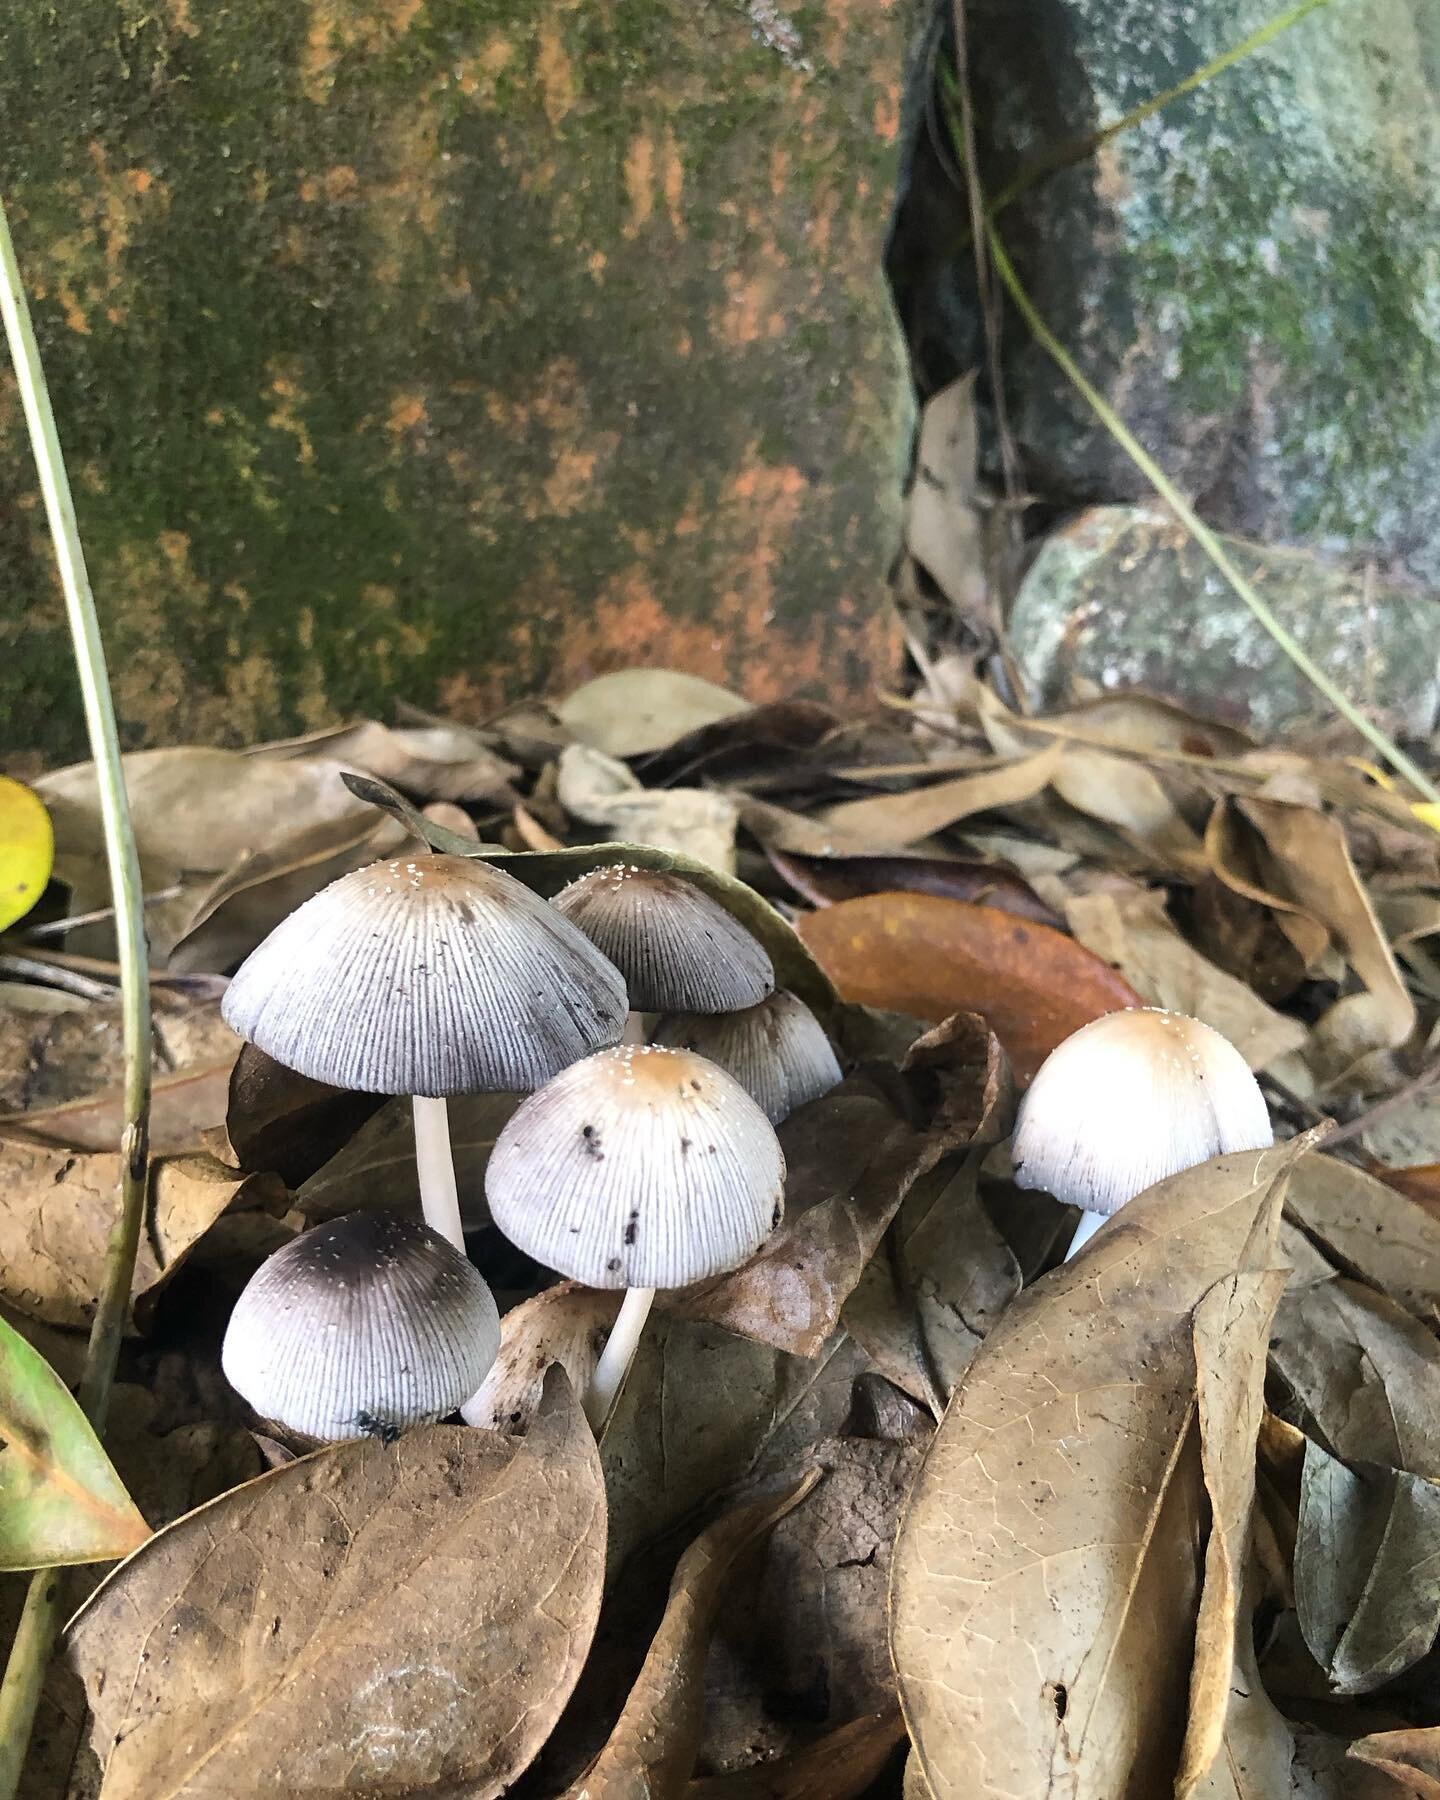 A few little treasures to brighten the day.  The reminder of the works going on underground and the shedding of bark from the eucalypts above as the tree makes room for new growth #mushrooms #eucalptusbark #dharawalcountry